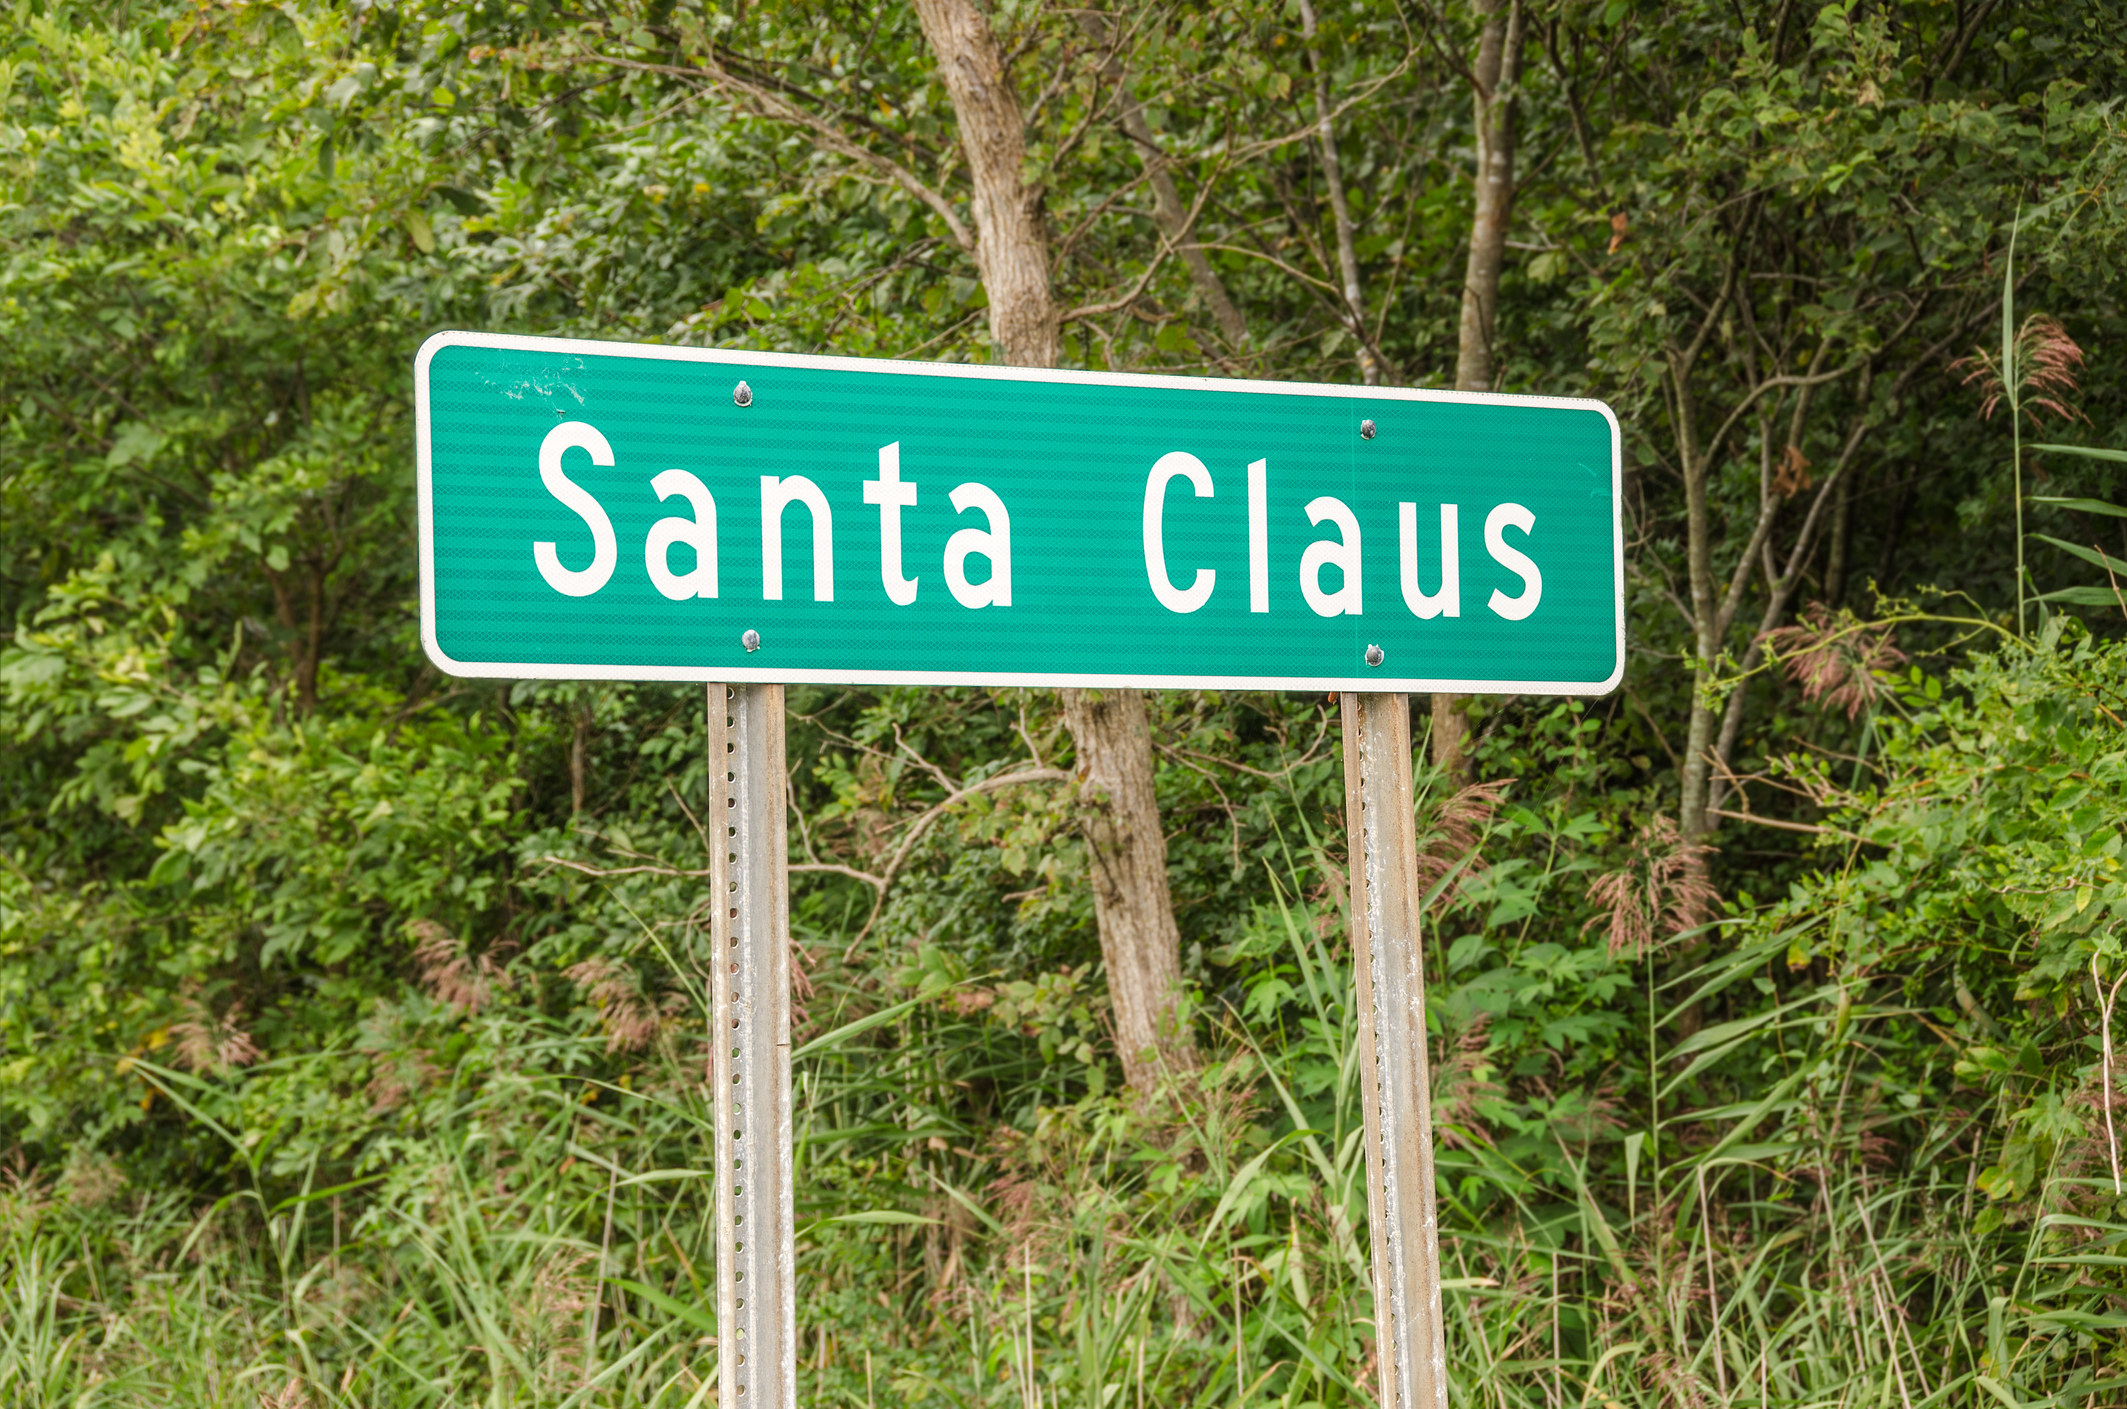 the highway sign for Santa Claus